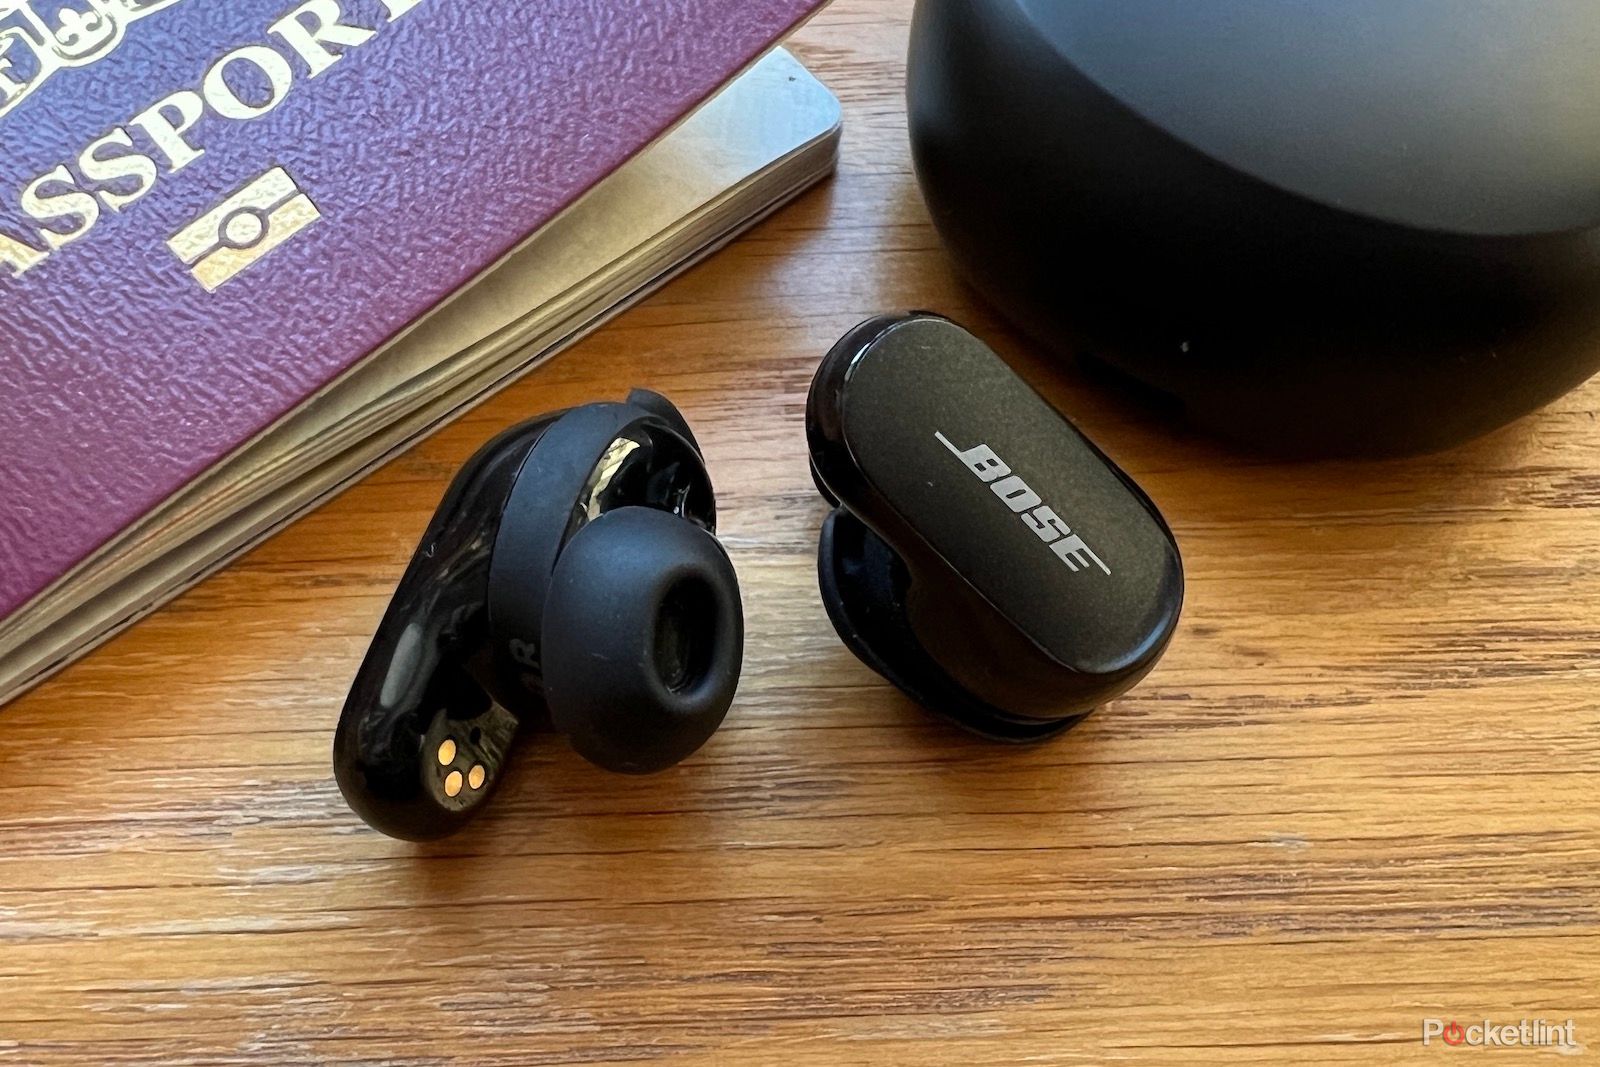 Our favorite noise-cancelling Bose earbuds are $50 off on